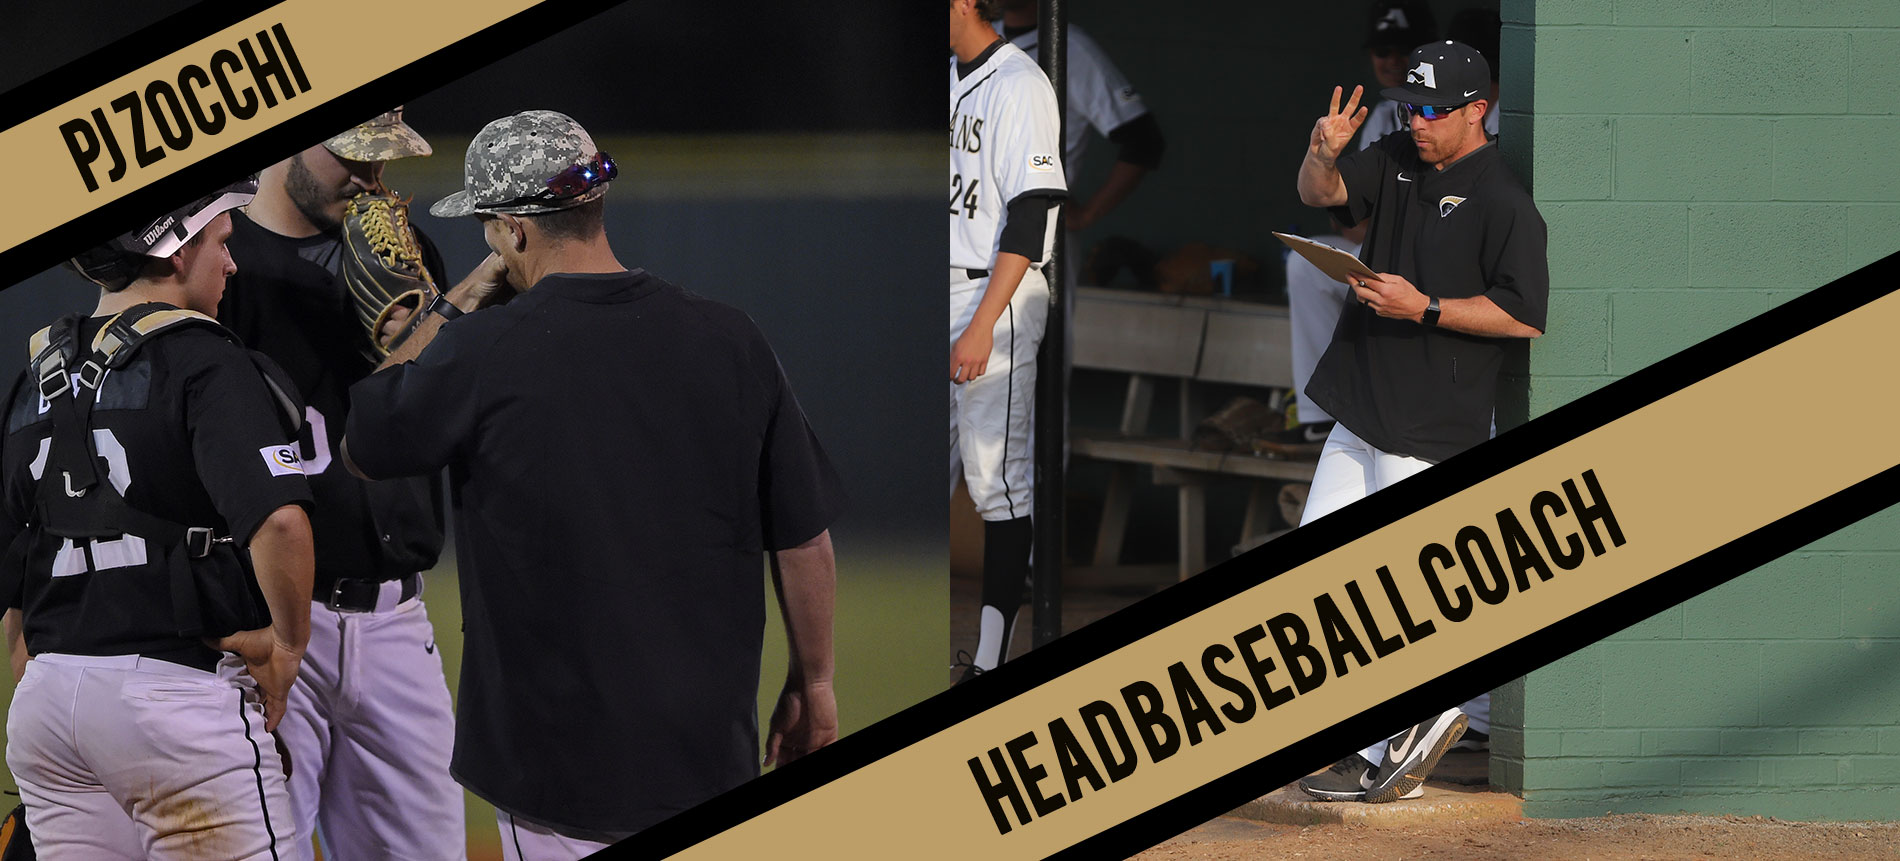 Zocchi Selected to Lead Anderson University Baseball